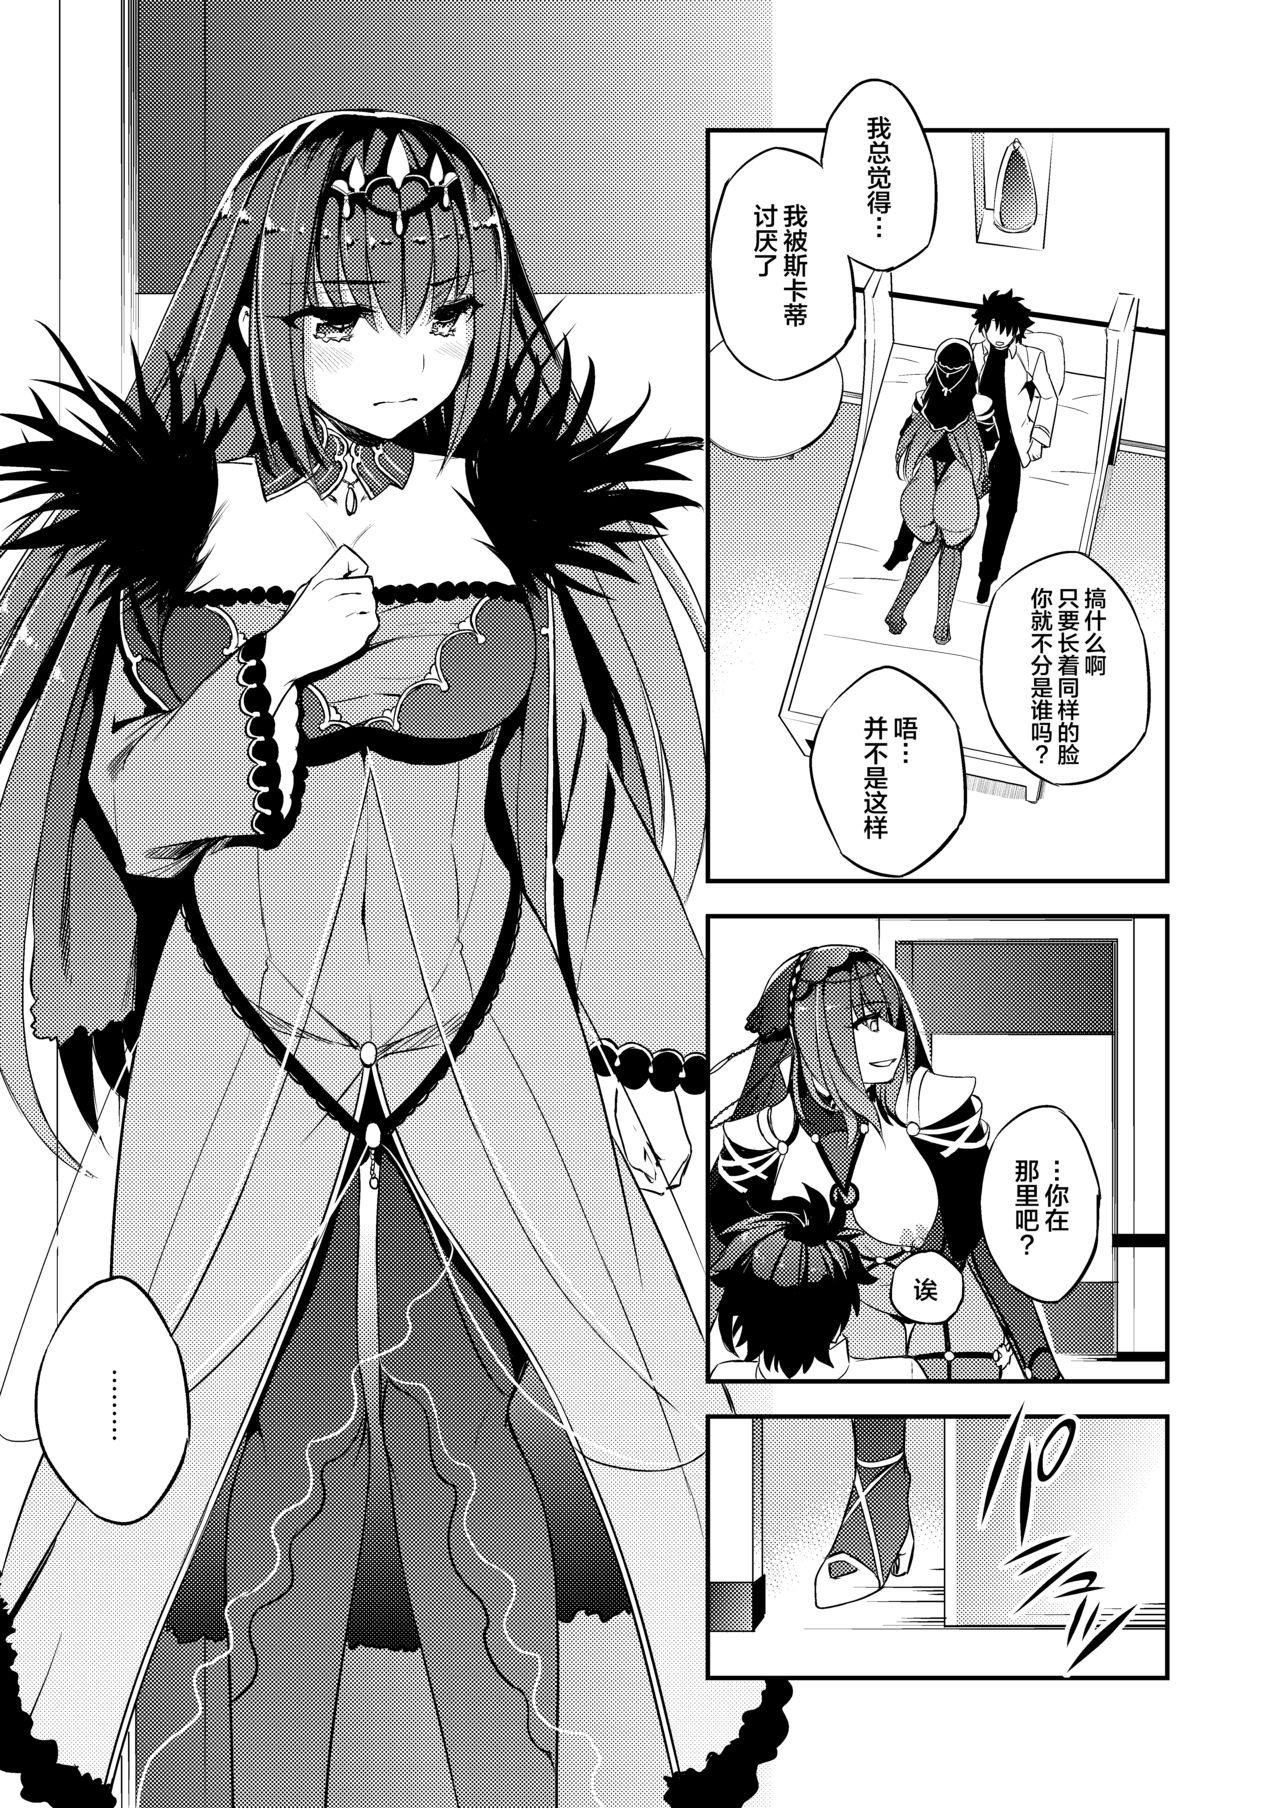 Polish C9-39 W Scathach to - Fate grand order Pussy Fucking - Page 5